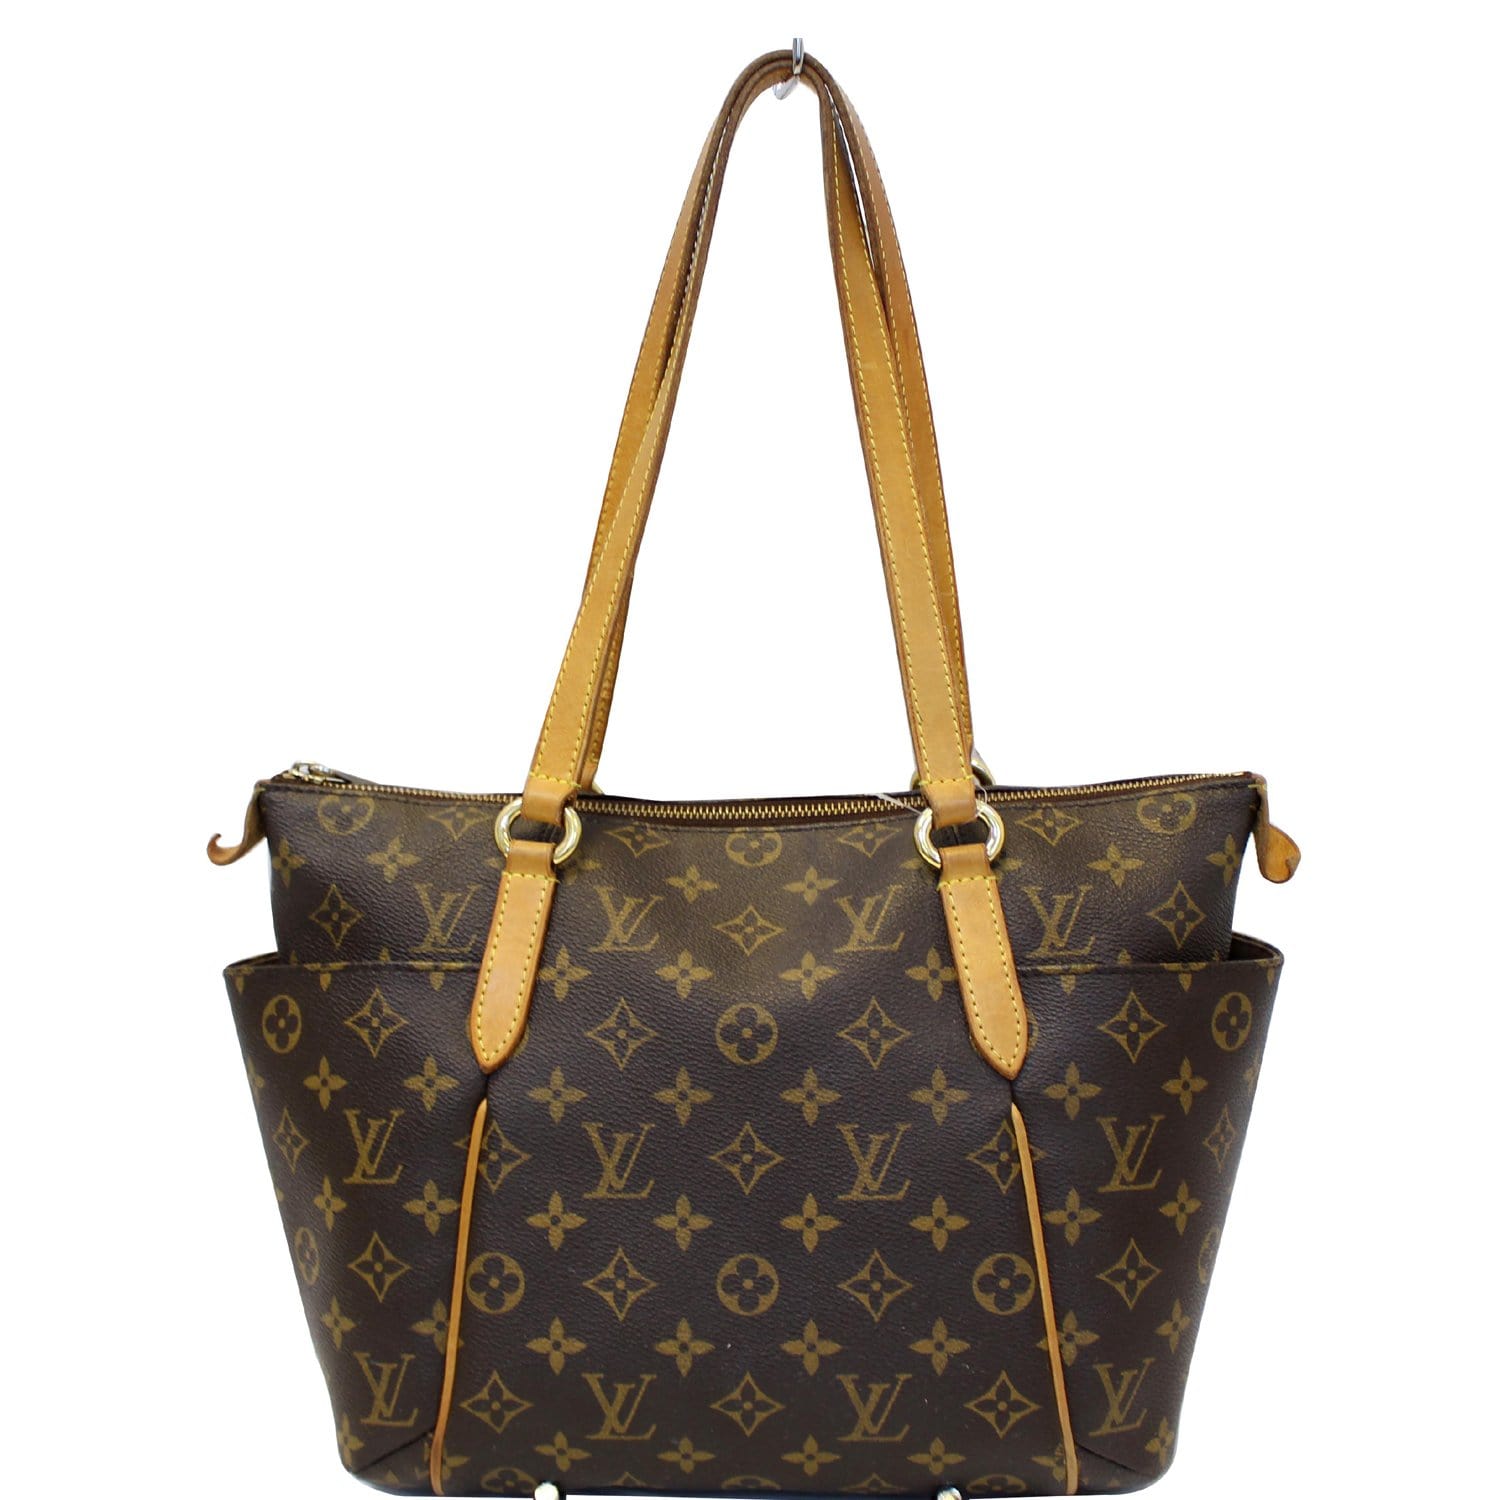 Riding in Cars with Louis Vuitton: 20+ Pics From One of PurseForum's Most  Popular Threads - PurseBlog